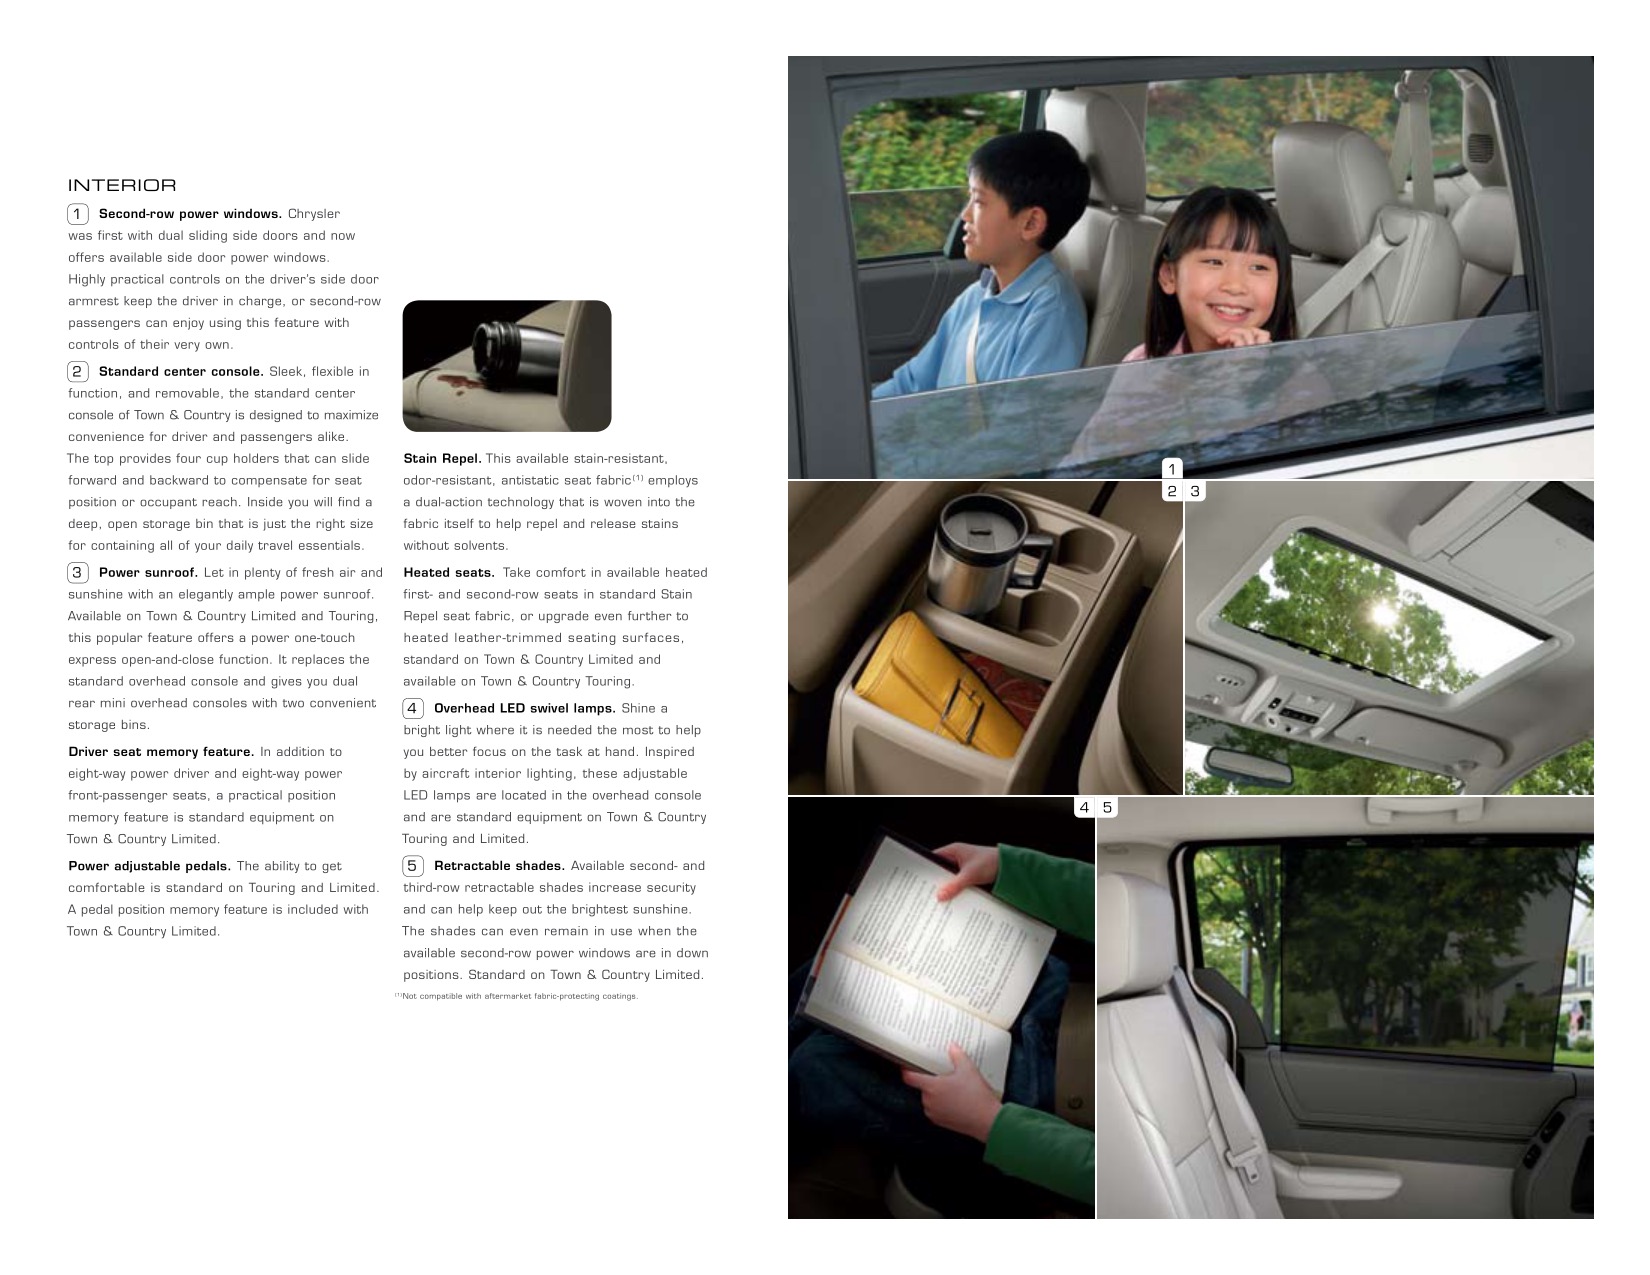 2009 Chrysler Town & Country Brochure Page 13